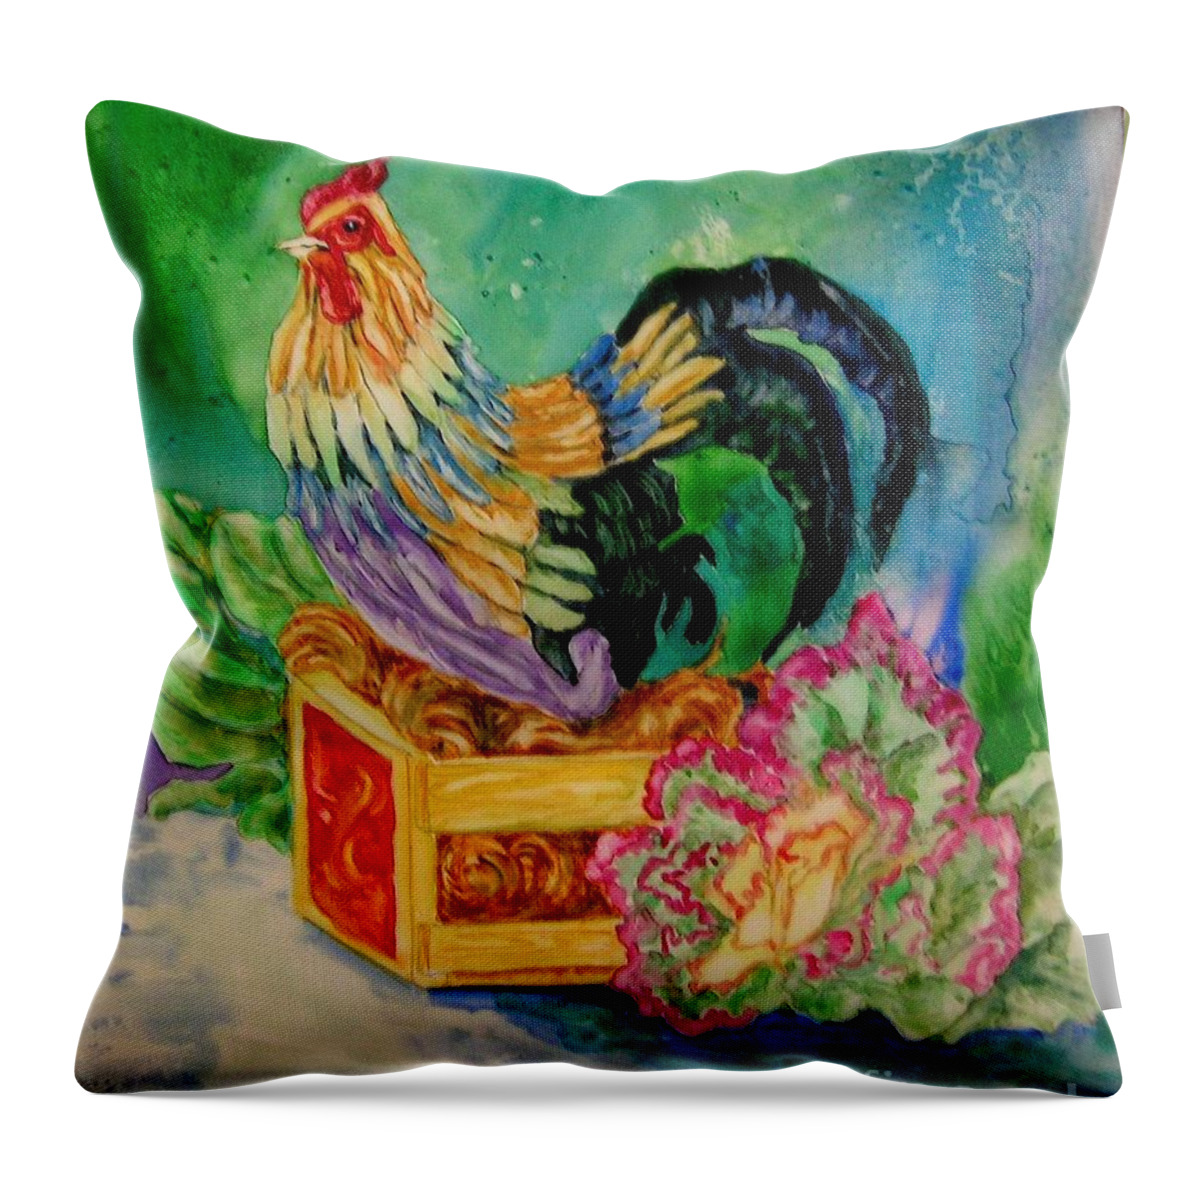 Chicken Throw Pillow featuring the painting Colorful Rooster by Genie Morgan